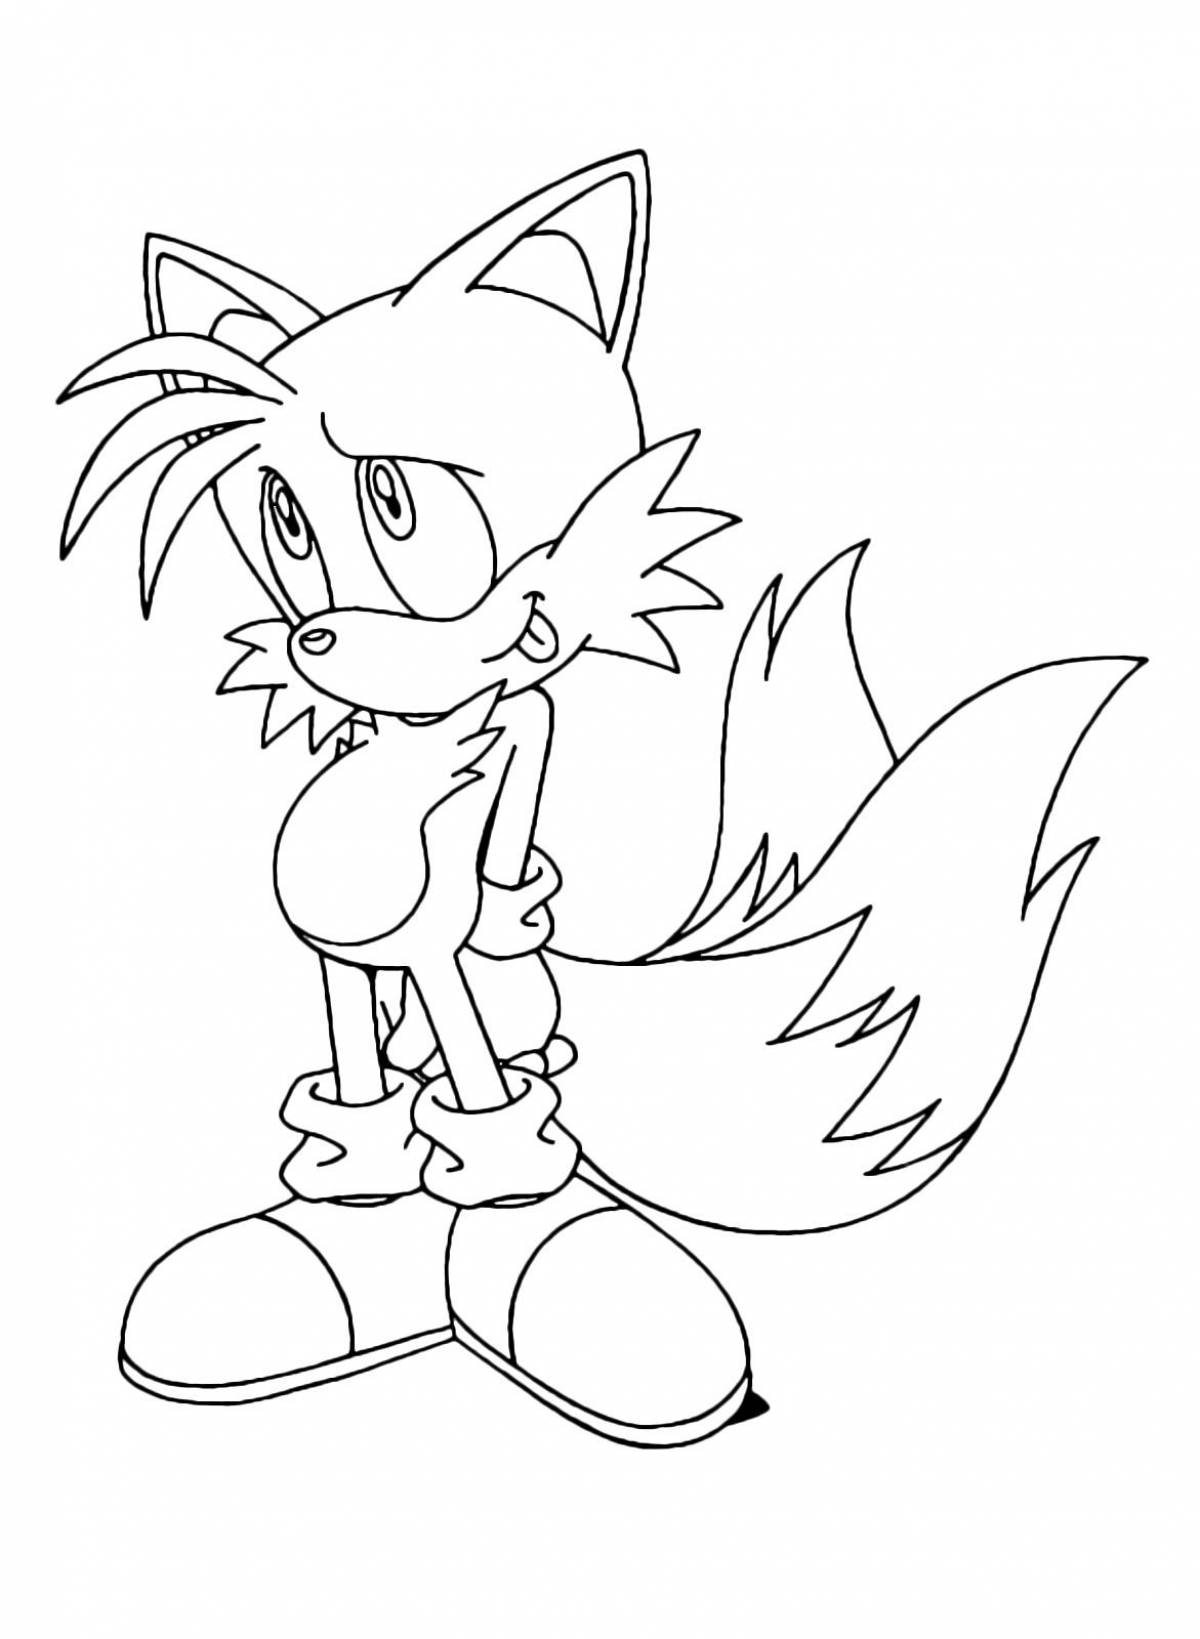 Fancy tails coloring book